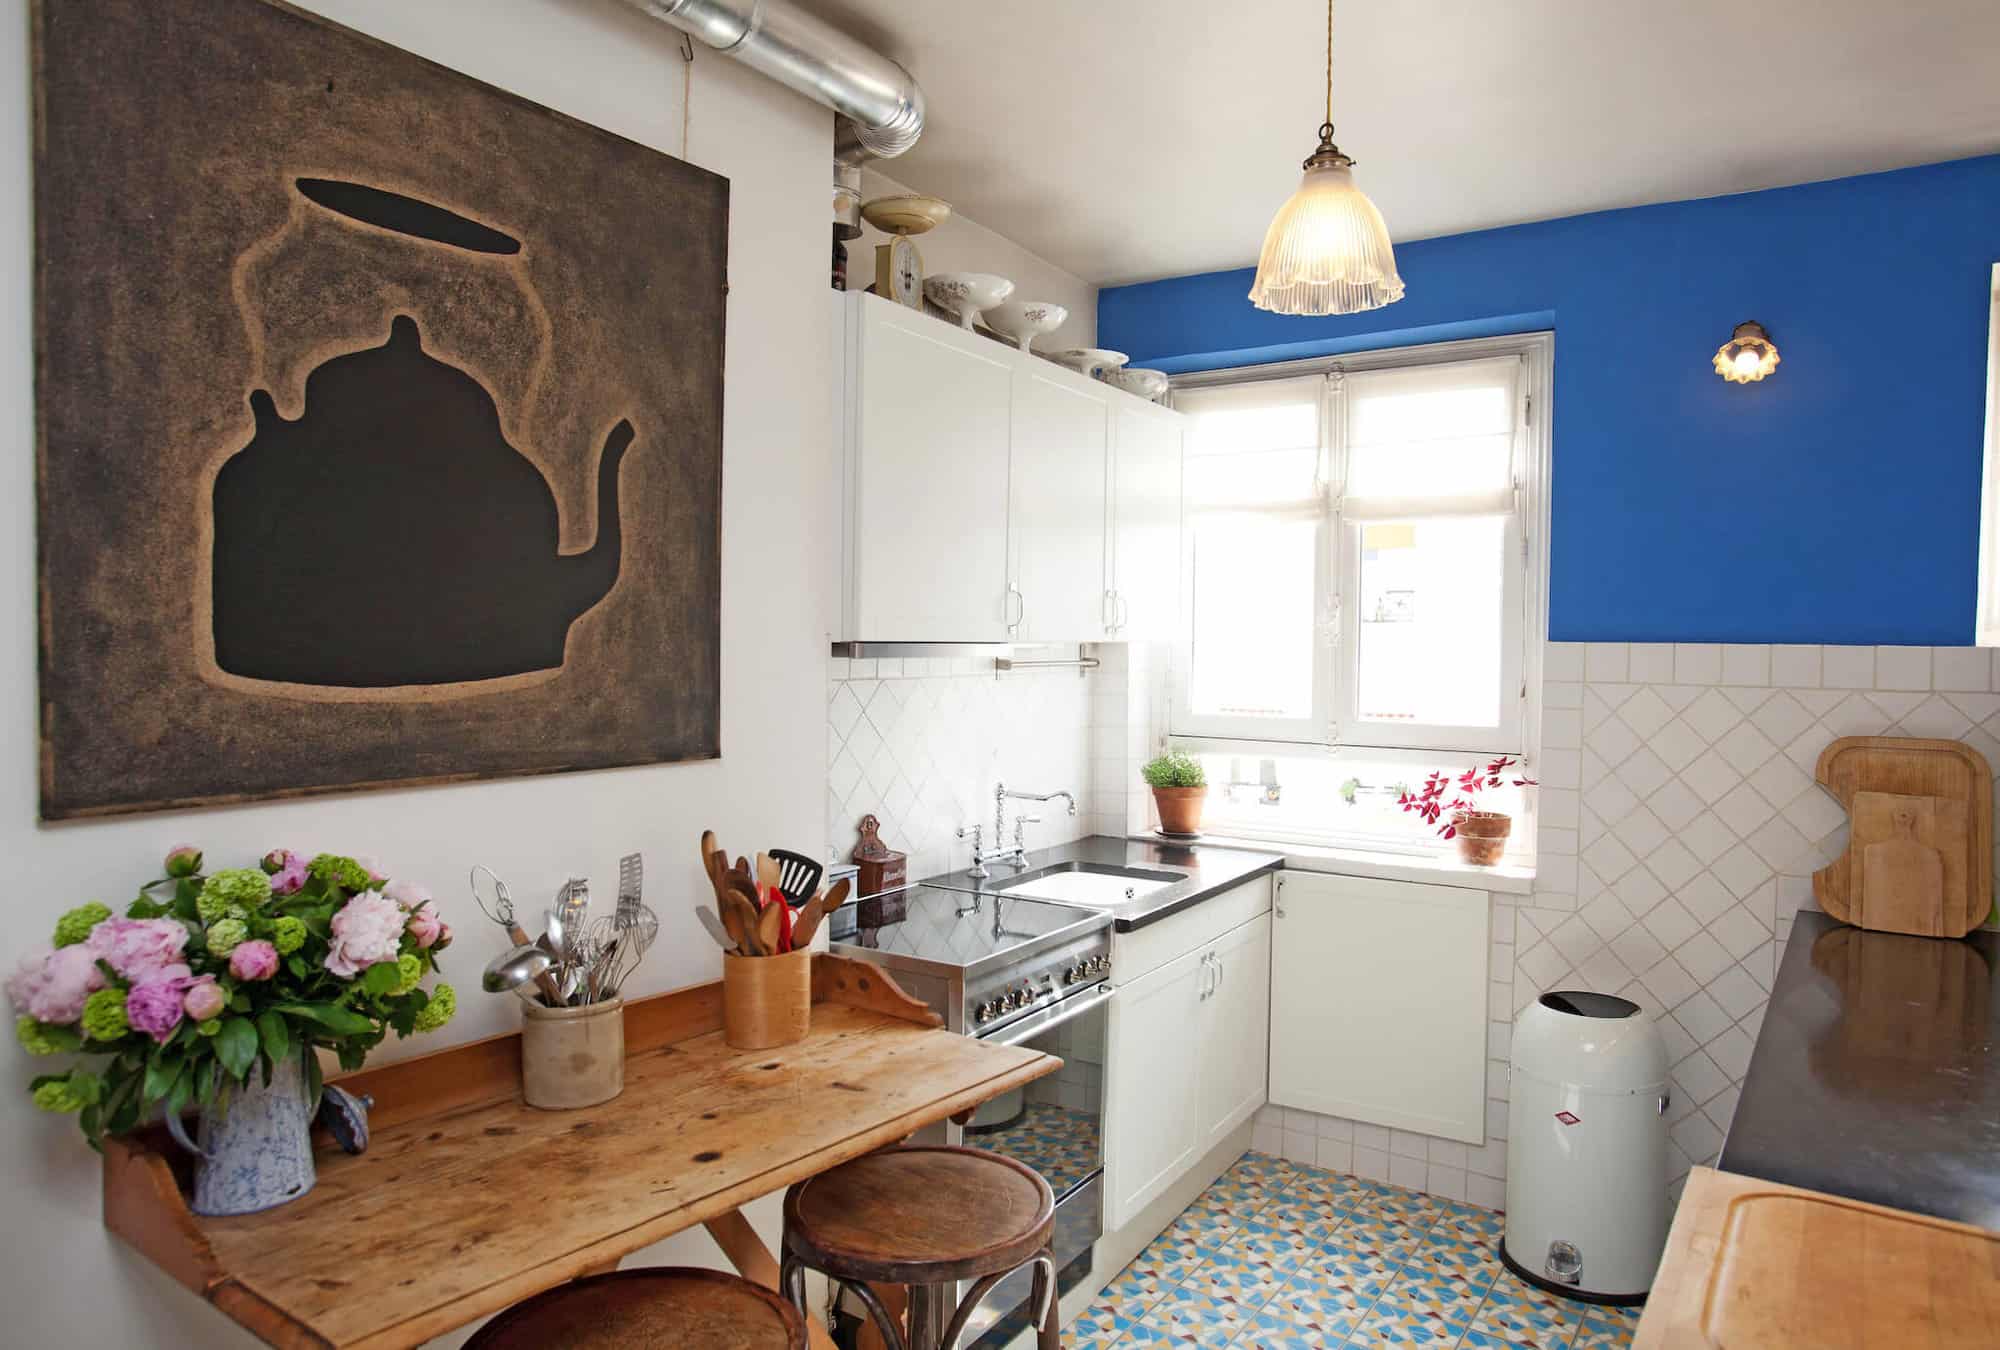 The kitchen of a Parisian apartment with patterned tiles, a blue feature wall, a wood breakfast bench with flowers, and a large artwork on the wall. 